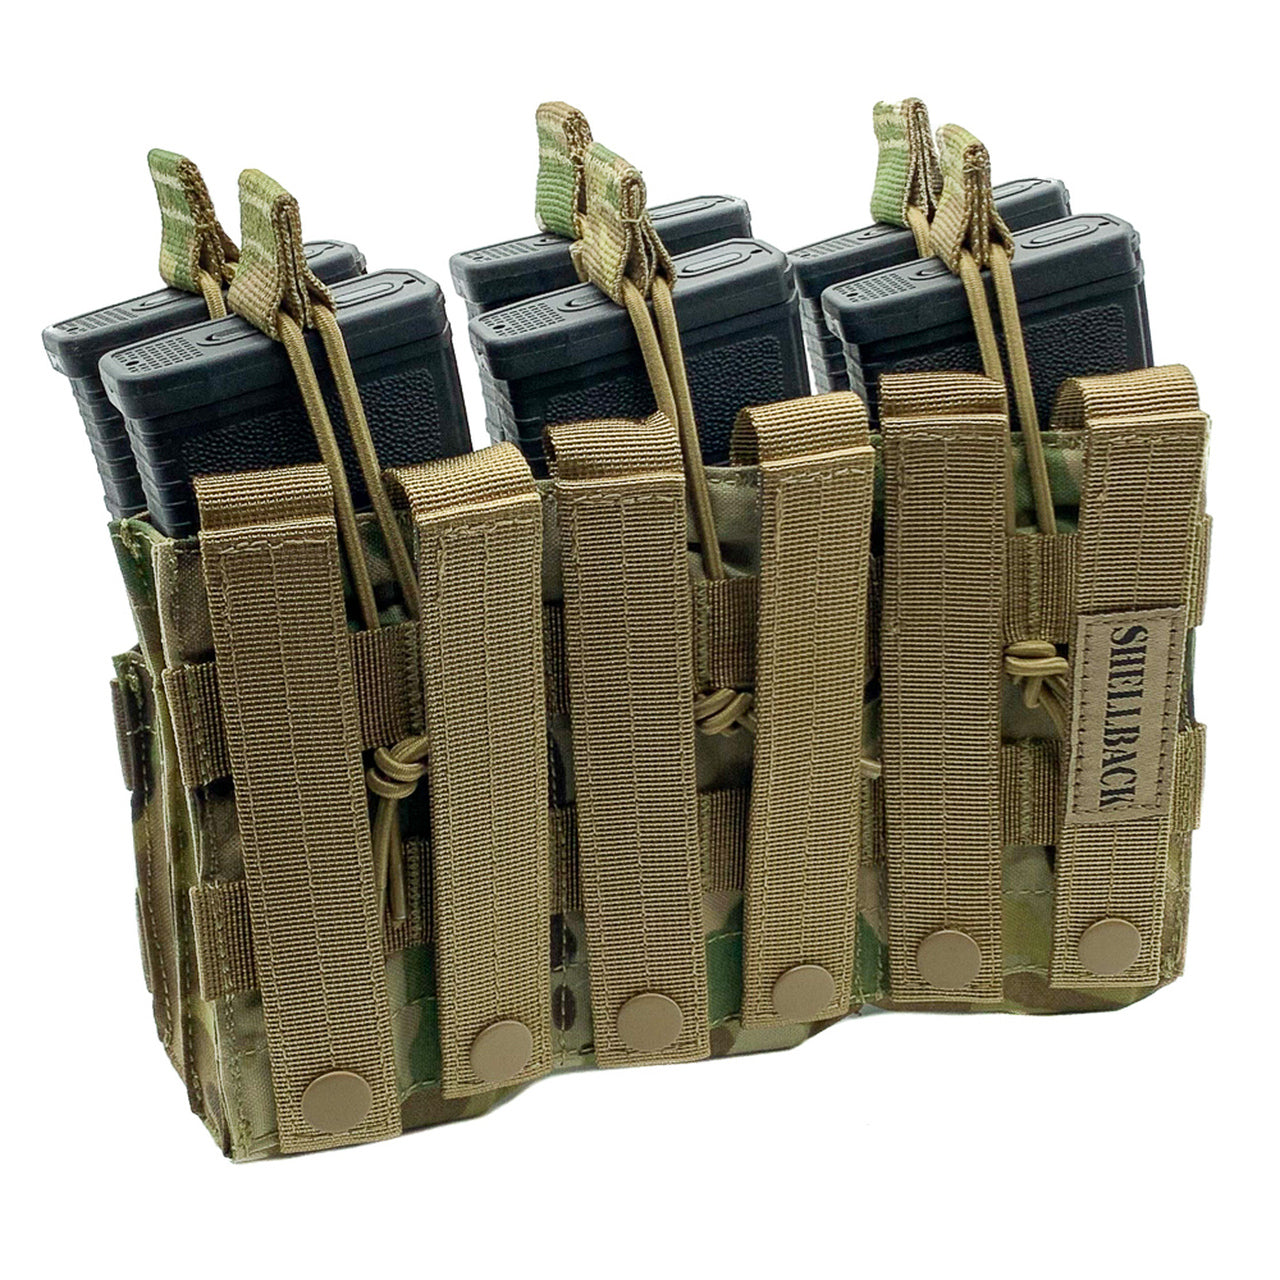 A Shellback Tactical Triple Stacker Open Top M4 Mag Pouch with four magazines.